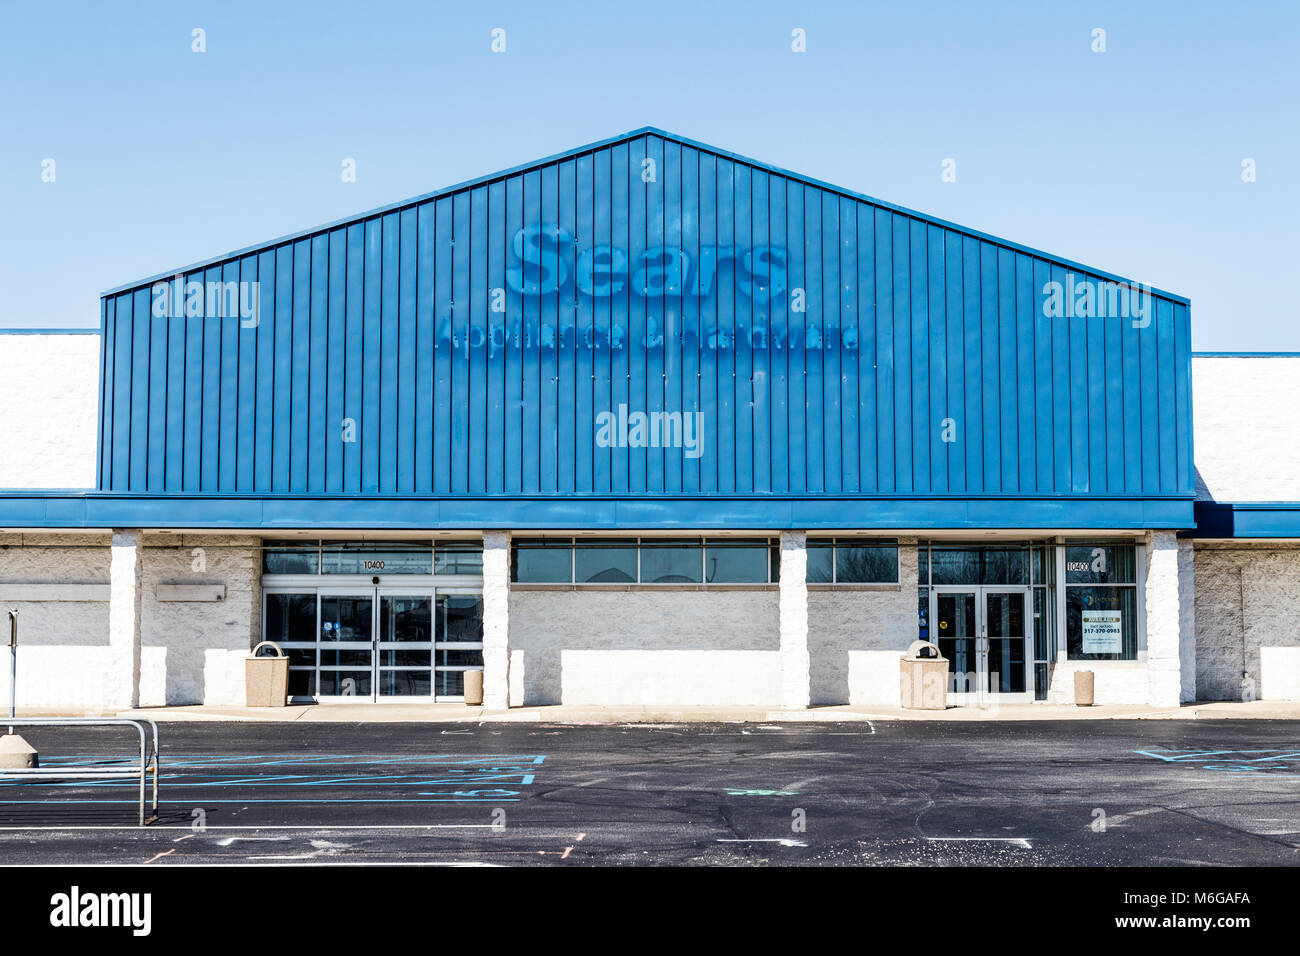 Indianapolis - Circa March 2018: Recently shuttered Sears Retail Location. According to a regulatory filing, Sears Holdings Corp. lost more than $2 bi Stock Photo